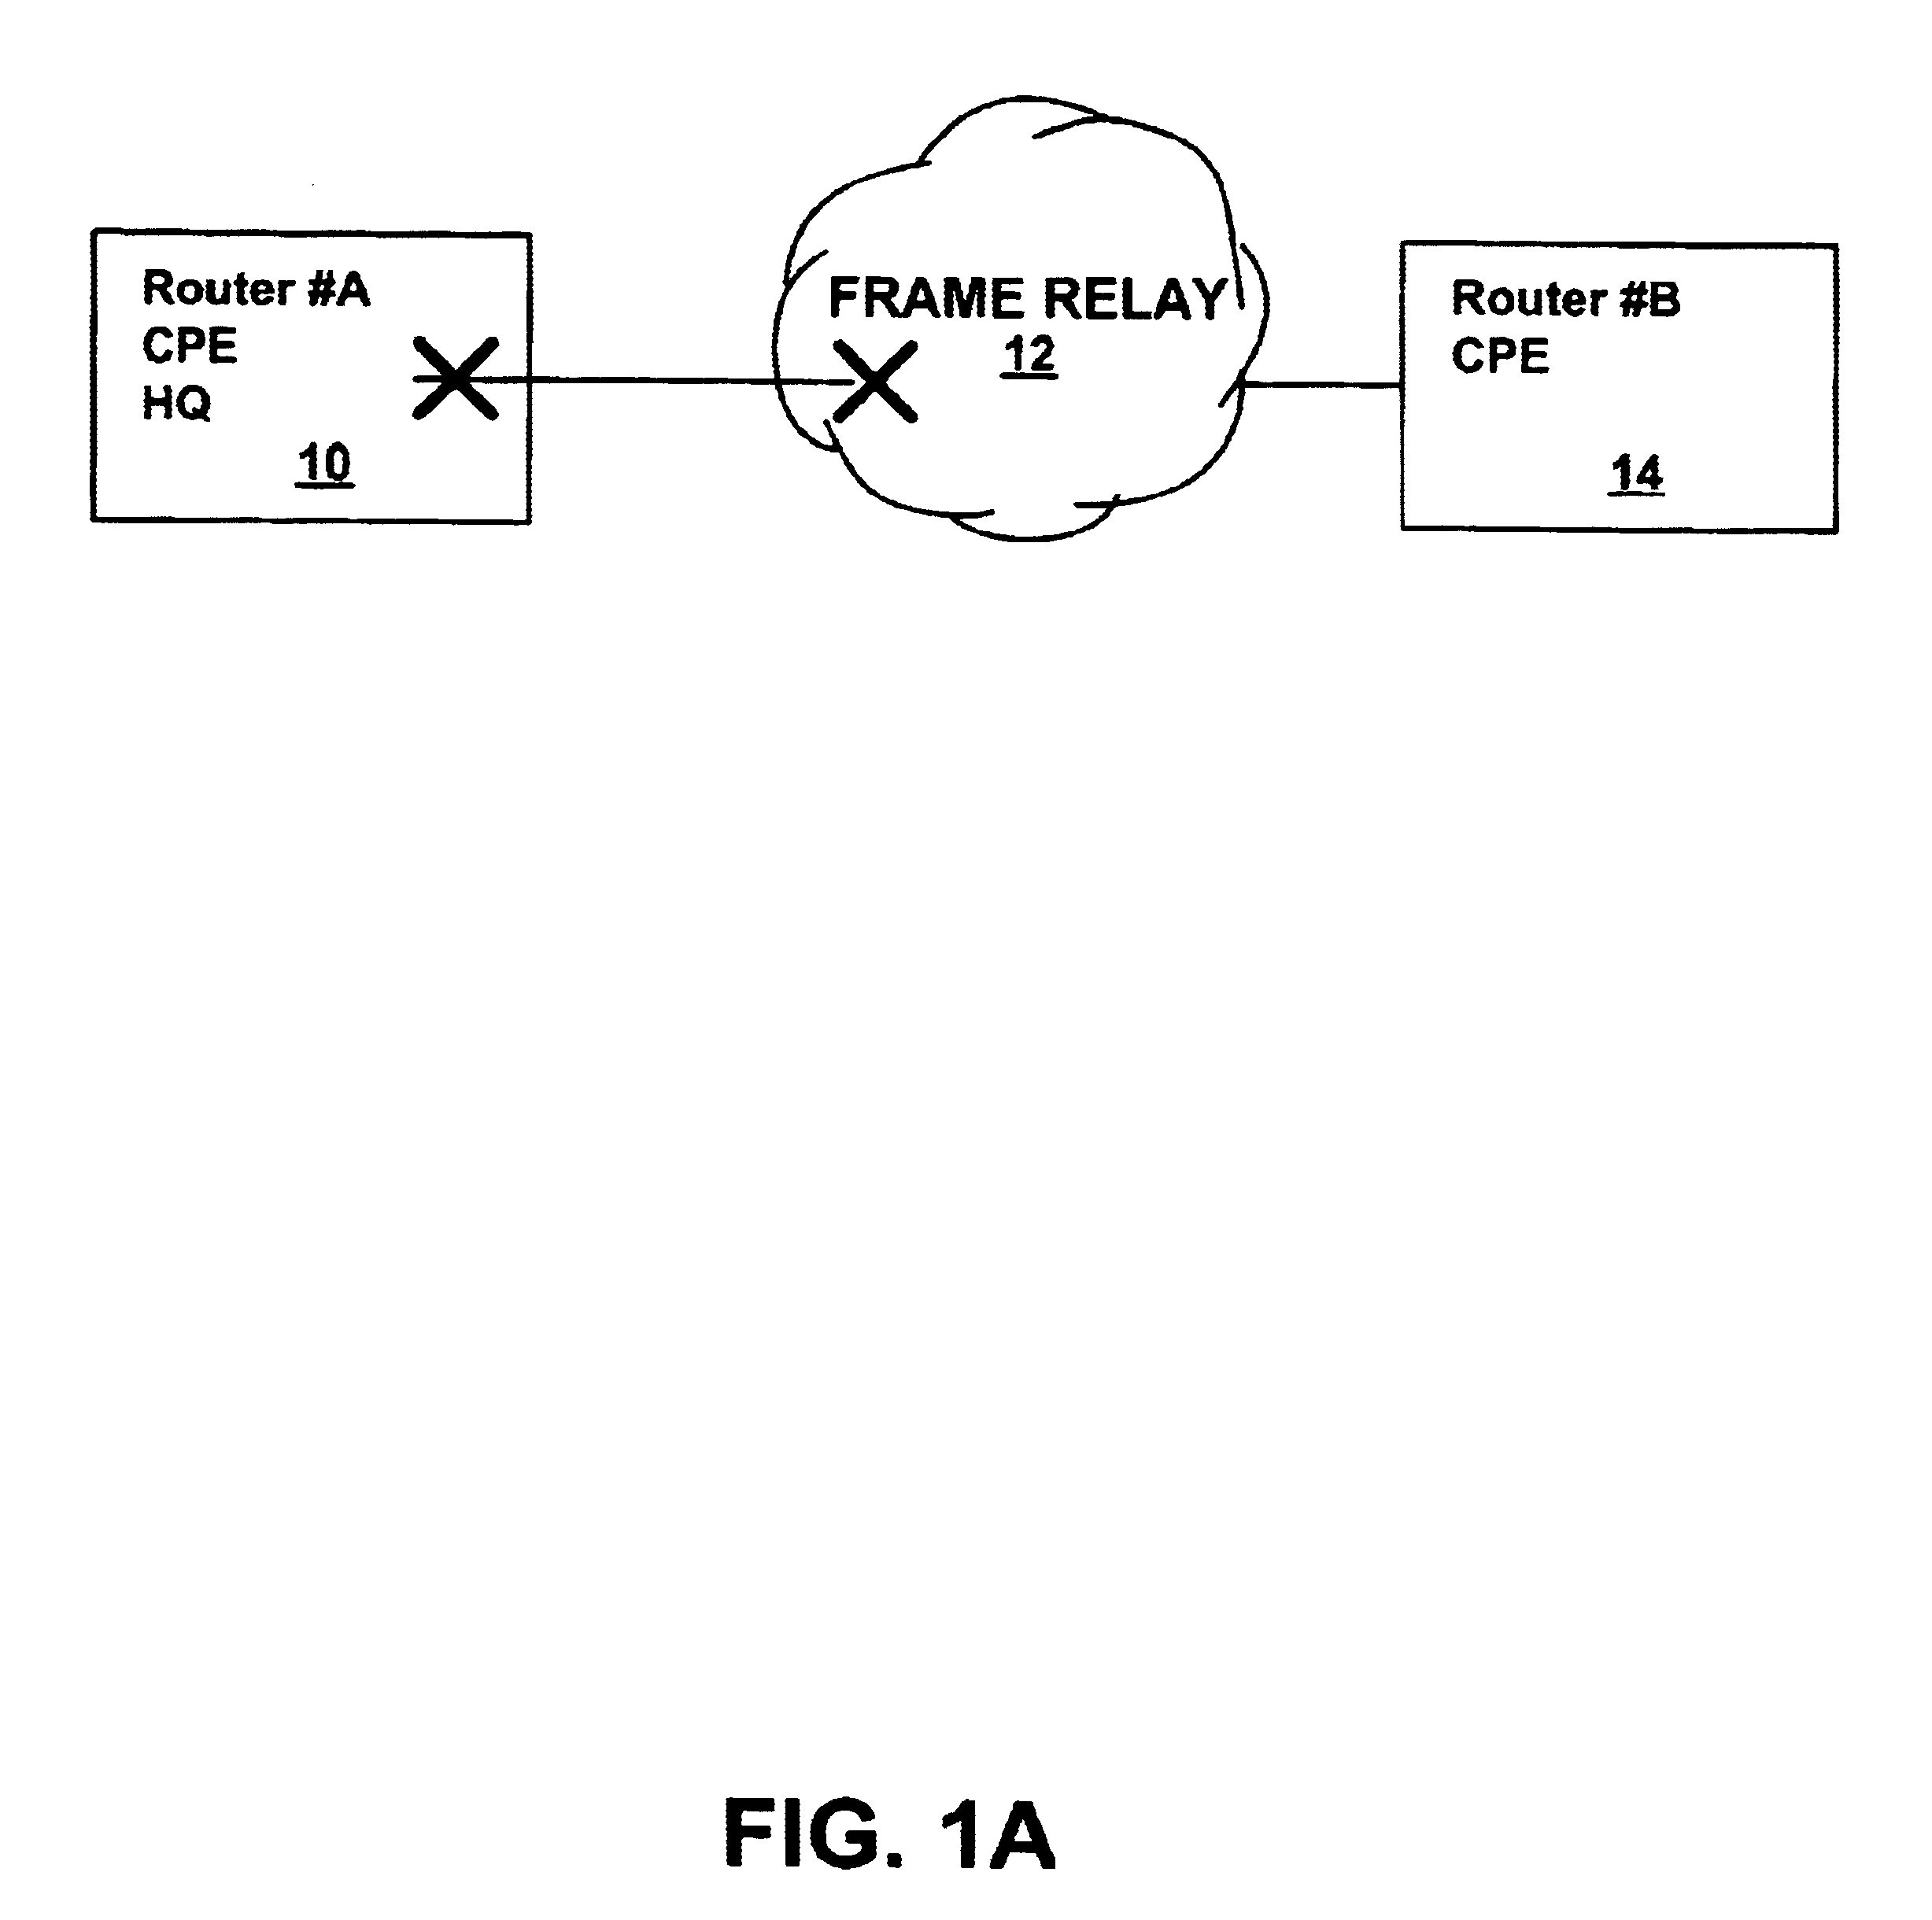 Dynamic control protocol for frame relay fragmentation in support of real-time applications such as VOIP and VOFR